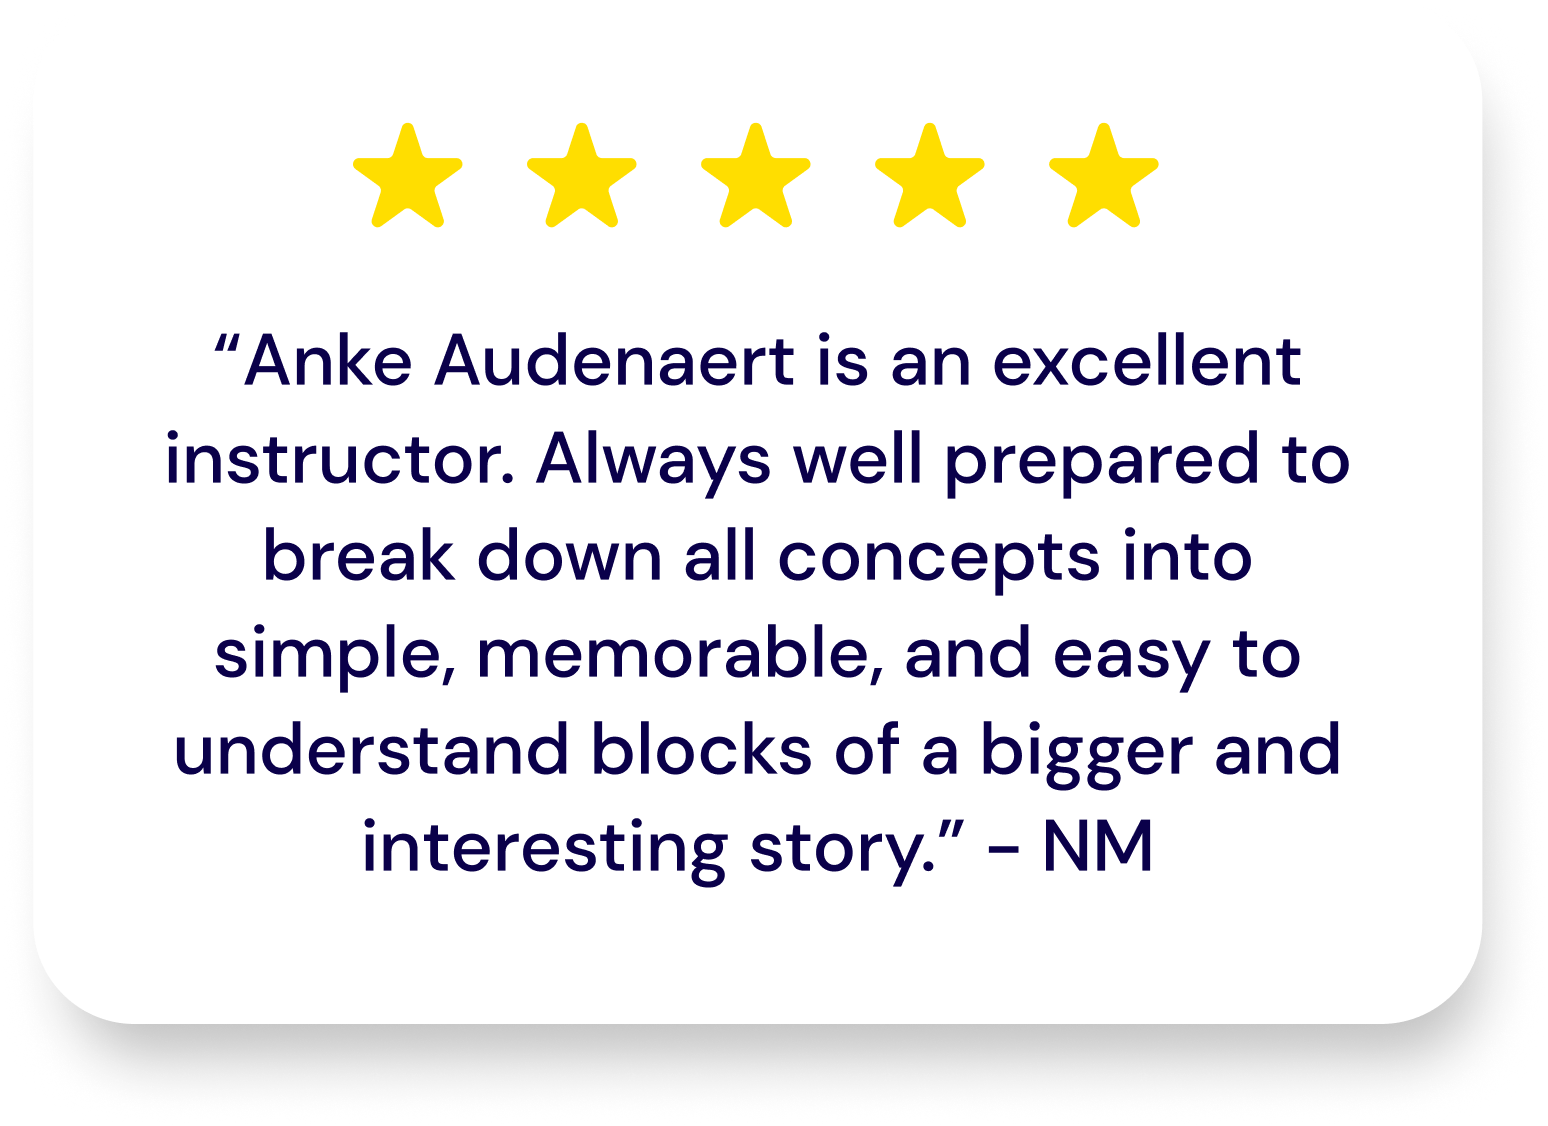 5 star rating from user NM: Anke Audenaert is an excellent instructor. Always well prepared to break down all concepts into simple, memorable, and easy to understand blocks of a bigger and interesting story.